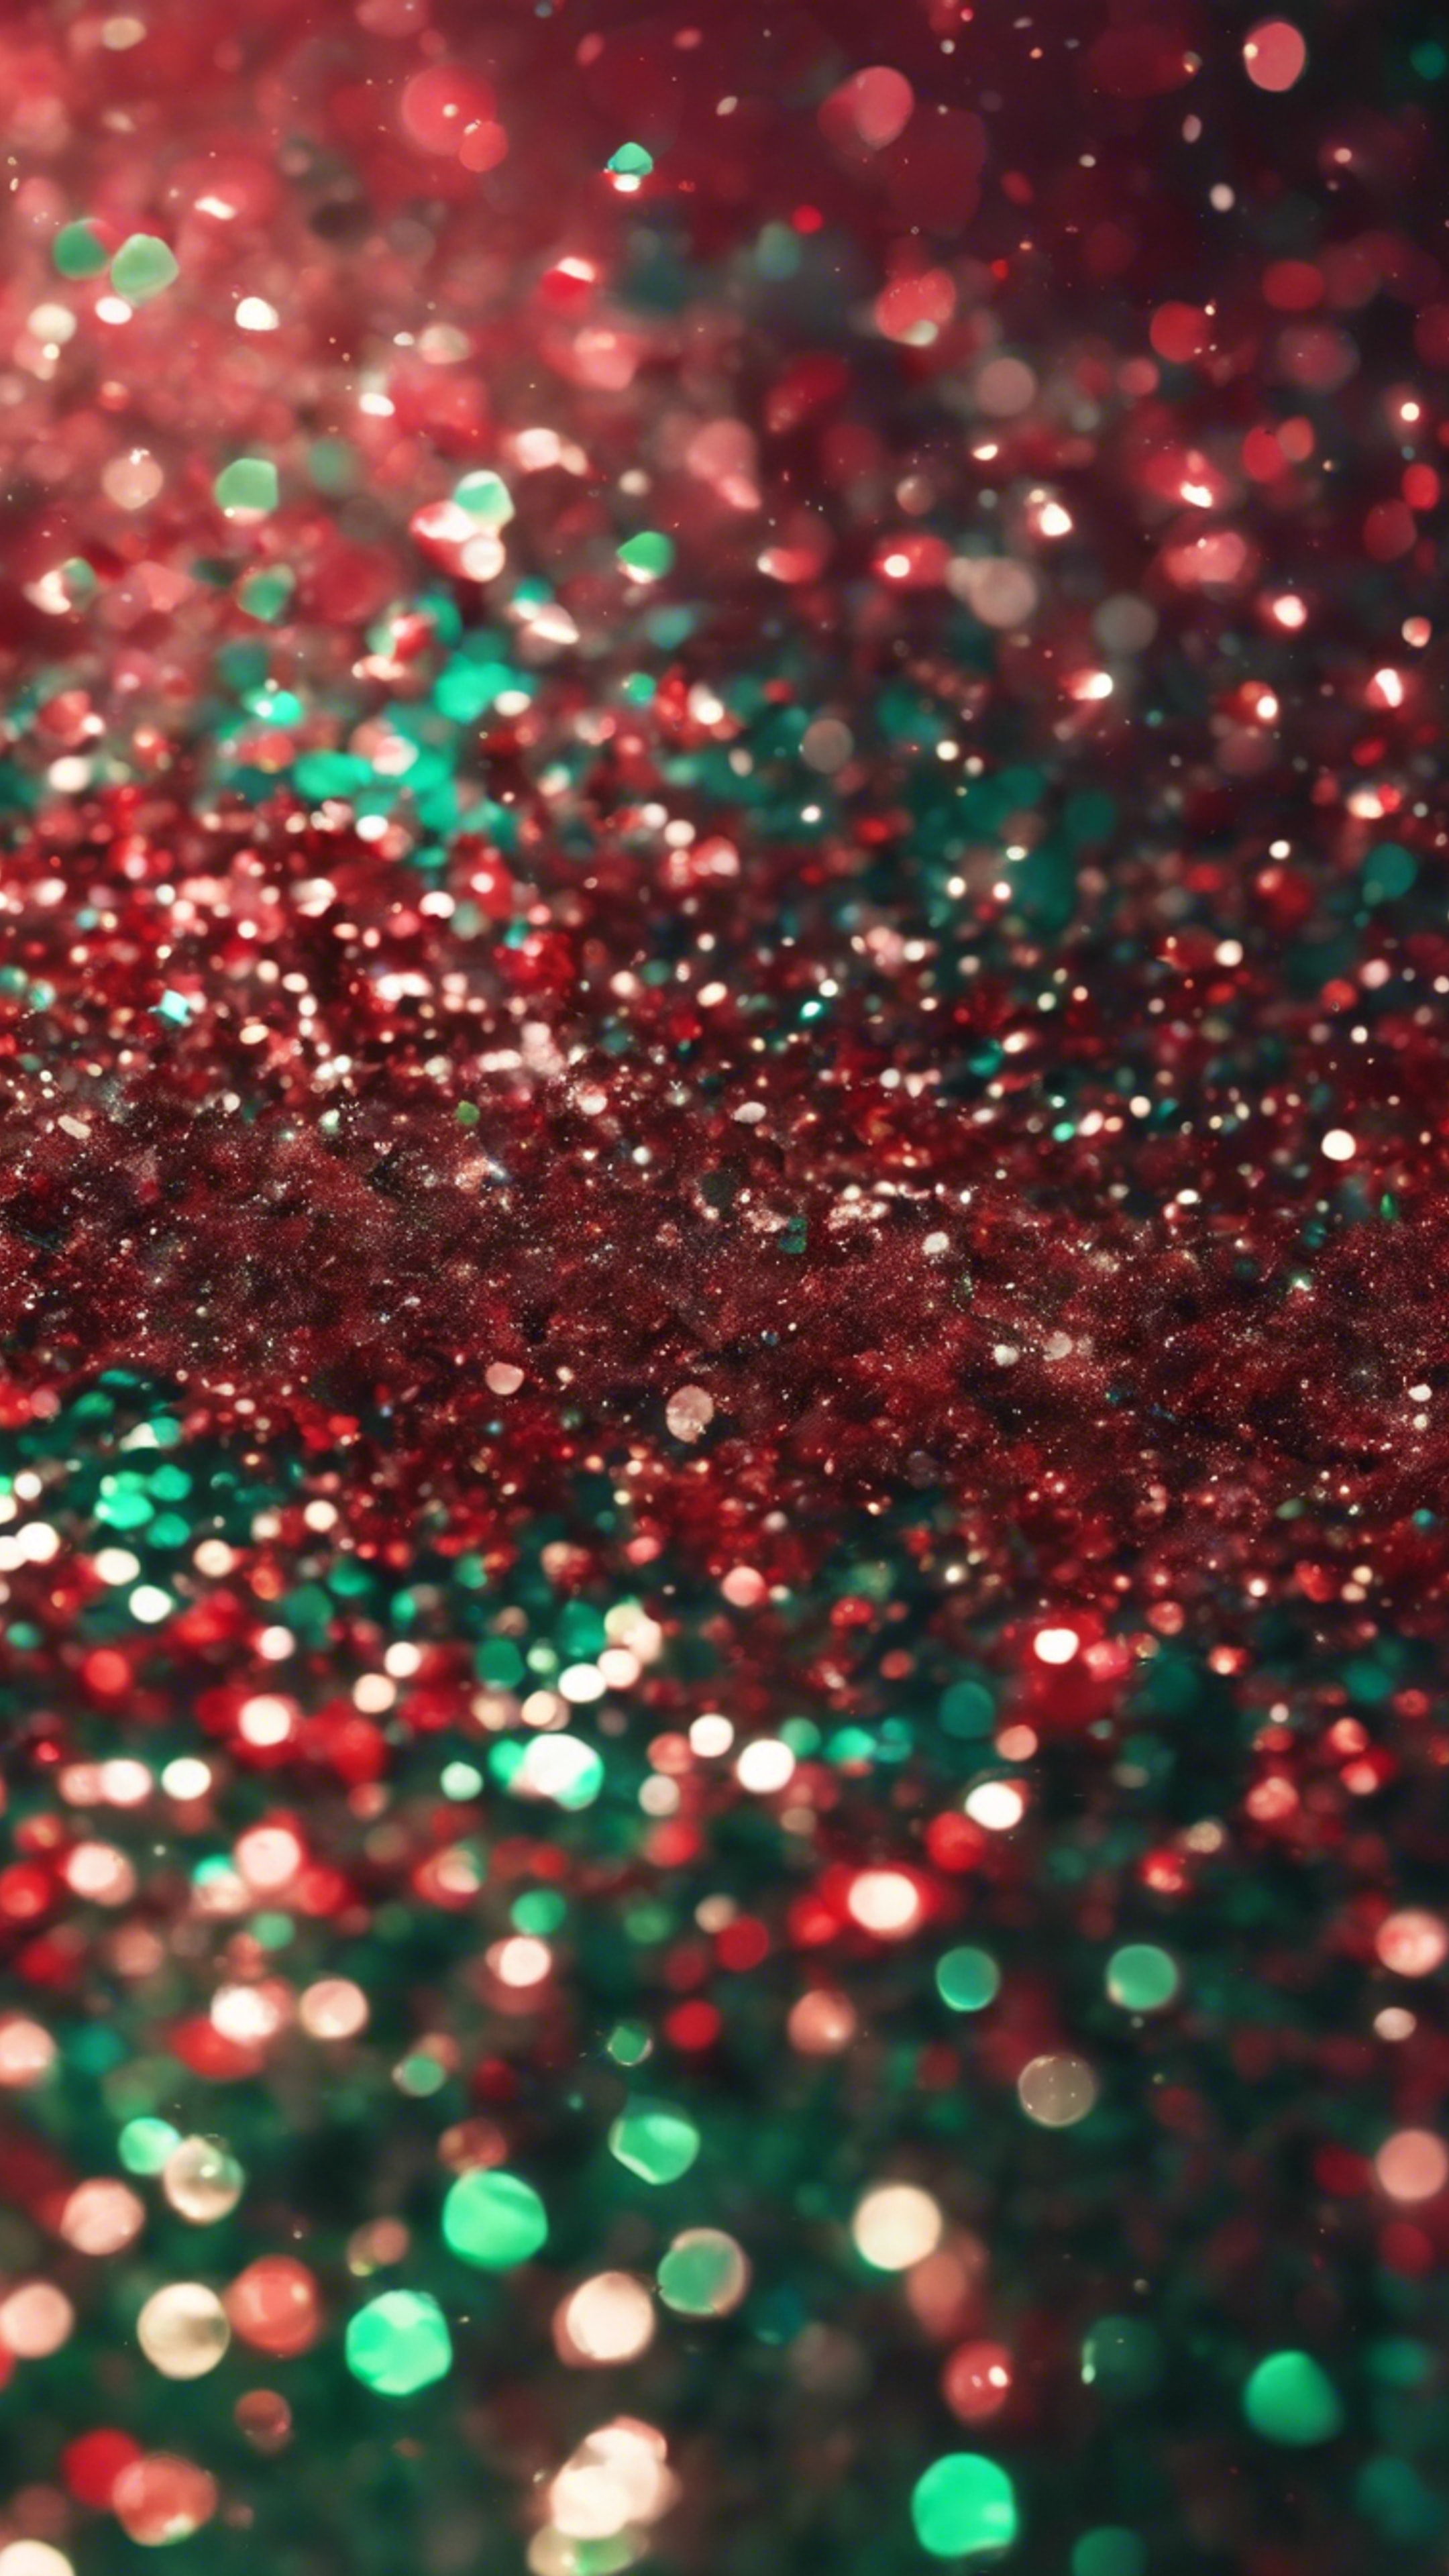 A mix of large and small particles of red and green glitter 牆紙[305fad2da0d041f9bf26]